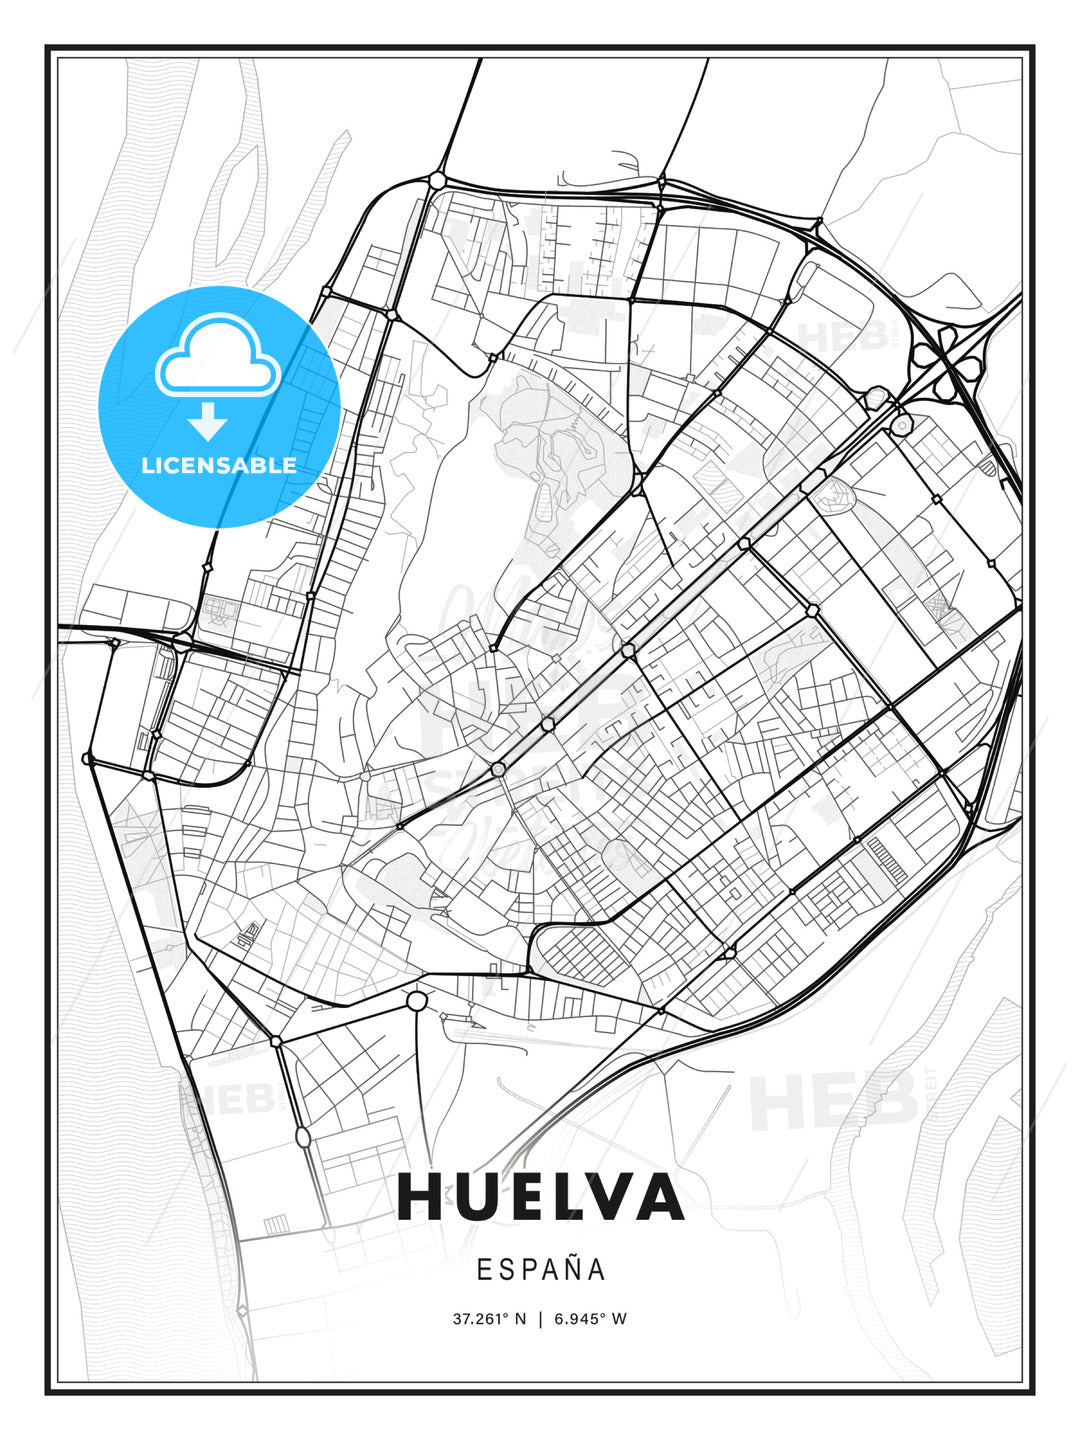 Huelva, Spain, Modern Print Template in Various Formats - HEBSTREITS Sketches